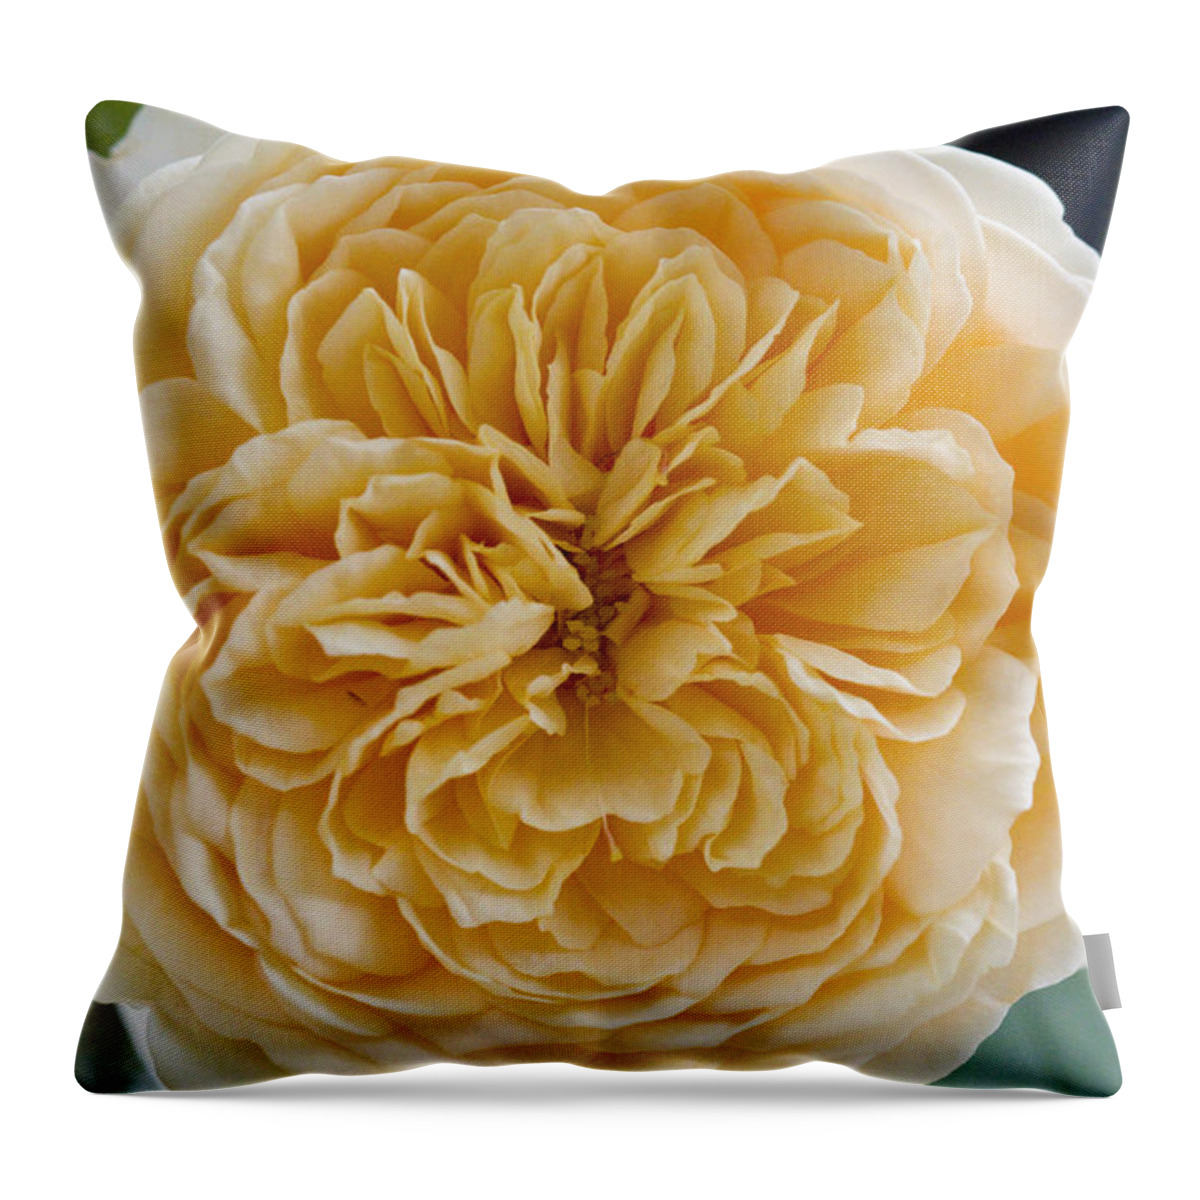 Rose Photographs Throw Pillow featuring the photograph Brenda's Garden I by Vernis Maxwell